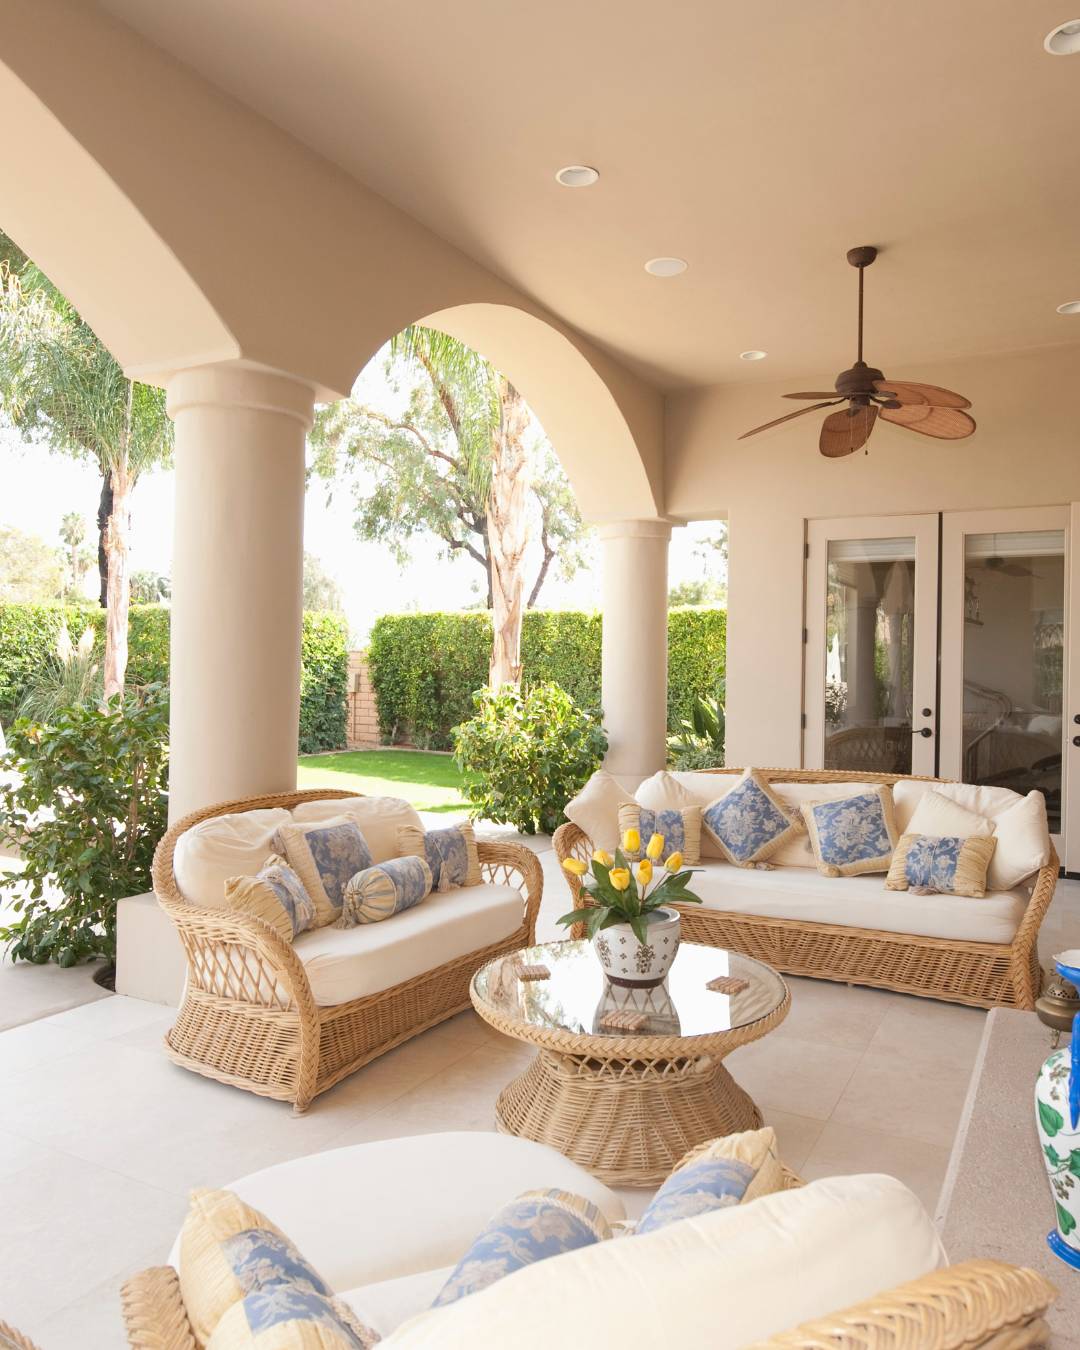 outdoor furniture in a neutral color